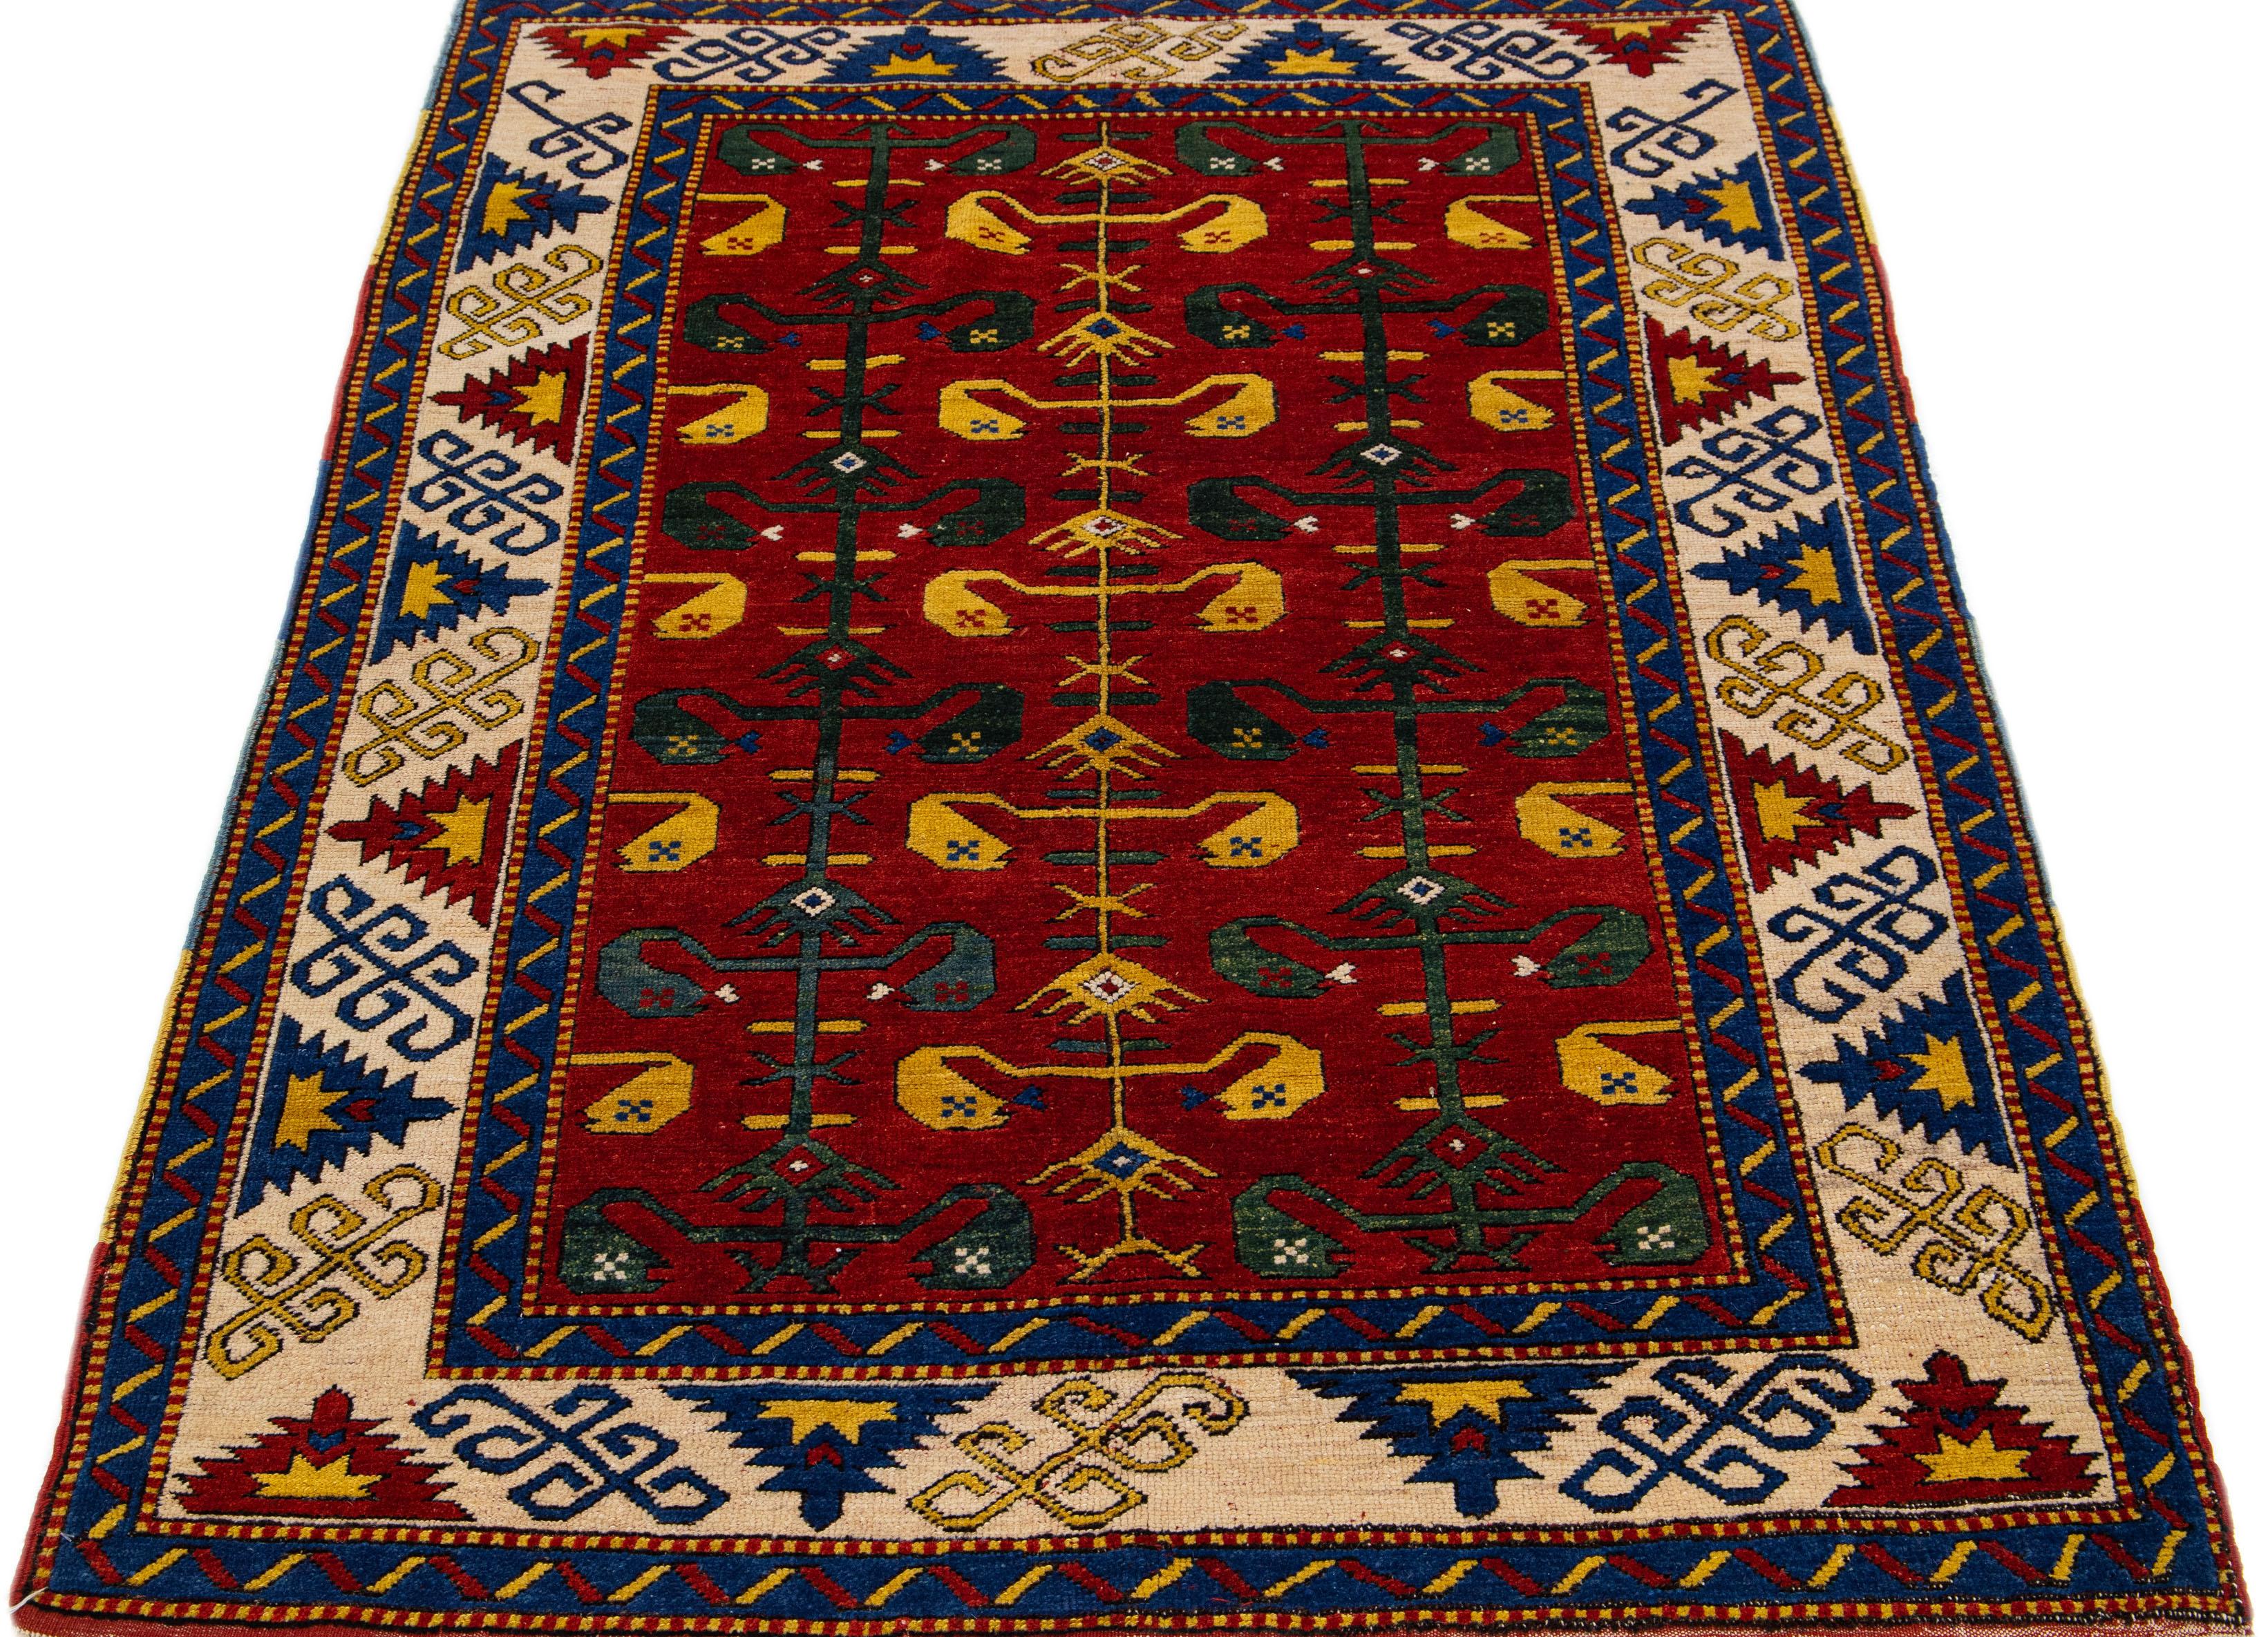 This Kazak wool rug is meticulously crafted by hand. The rug boasts a rich red palette, adorned with delicate embellishments in varying shades of yellow, green, blue, and beige, showcasing an intricate geometric pattern that covers the entirety of